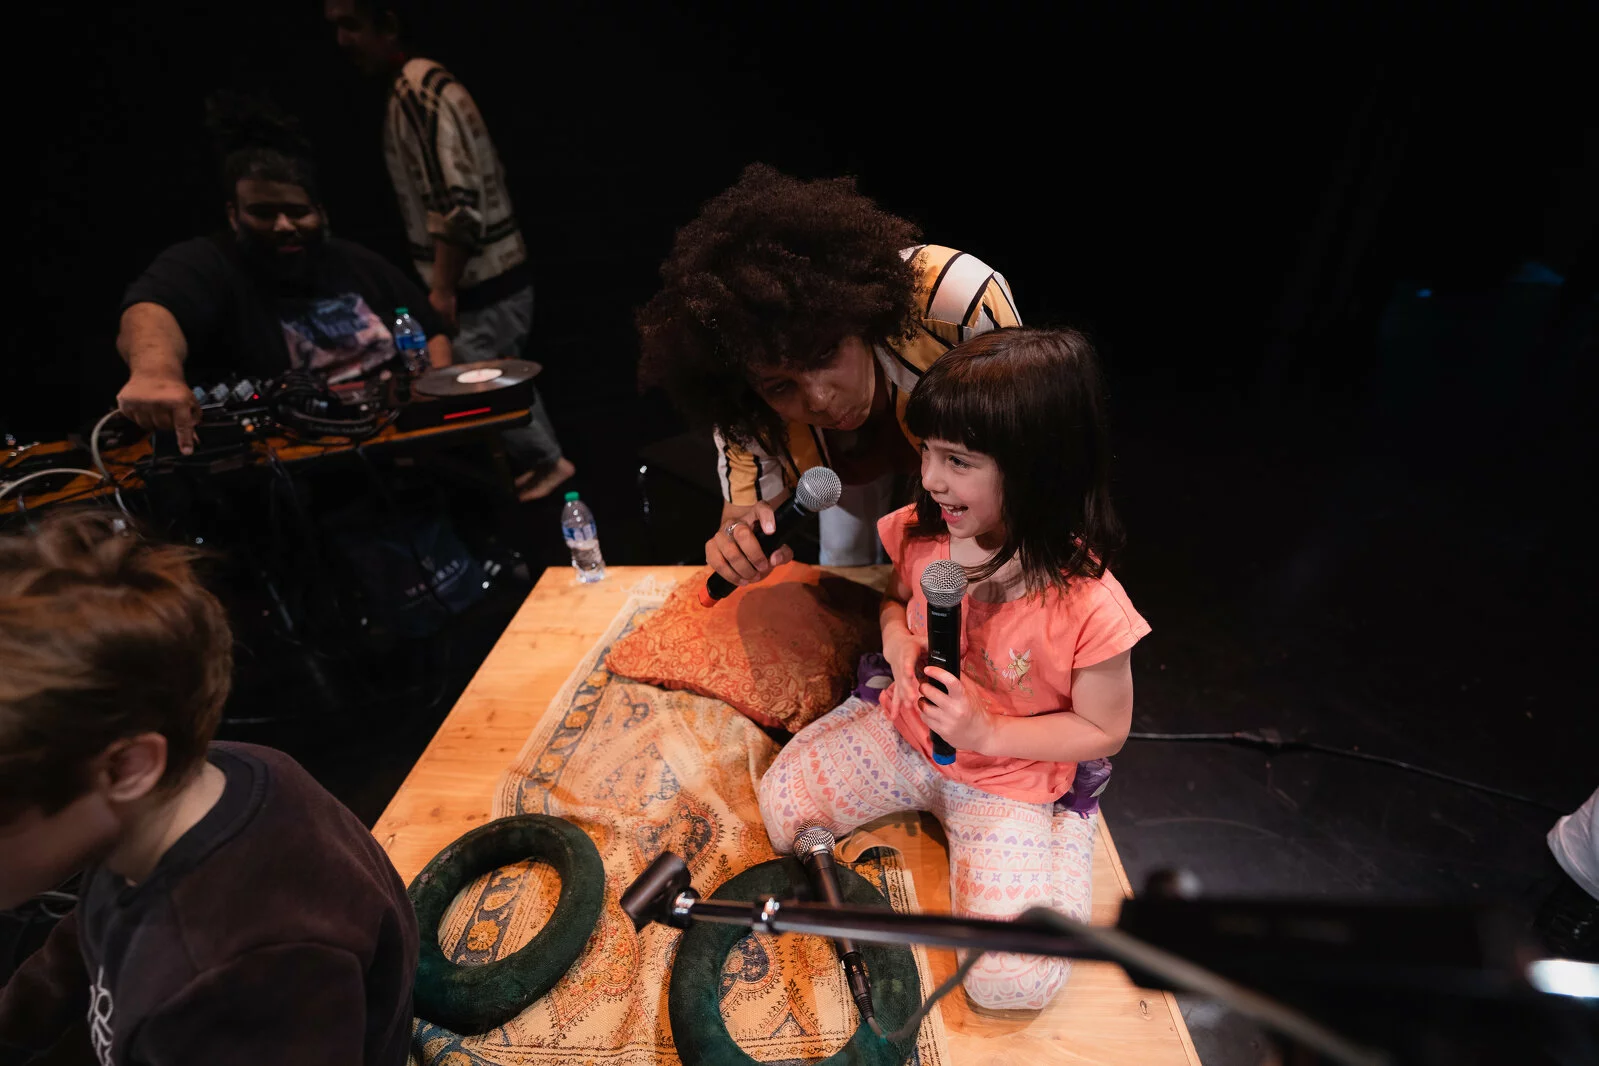 A child and an adult lean in together with microphones in their hands. Behind them a man sits at a table with a record player and sound equipment.